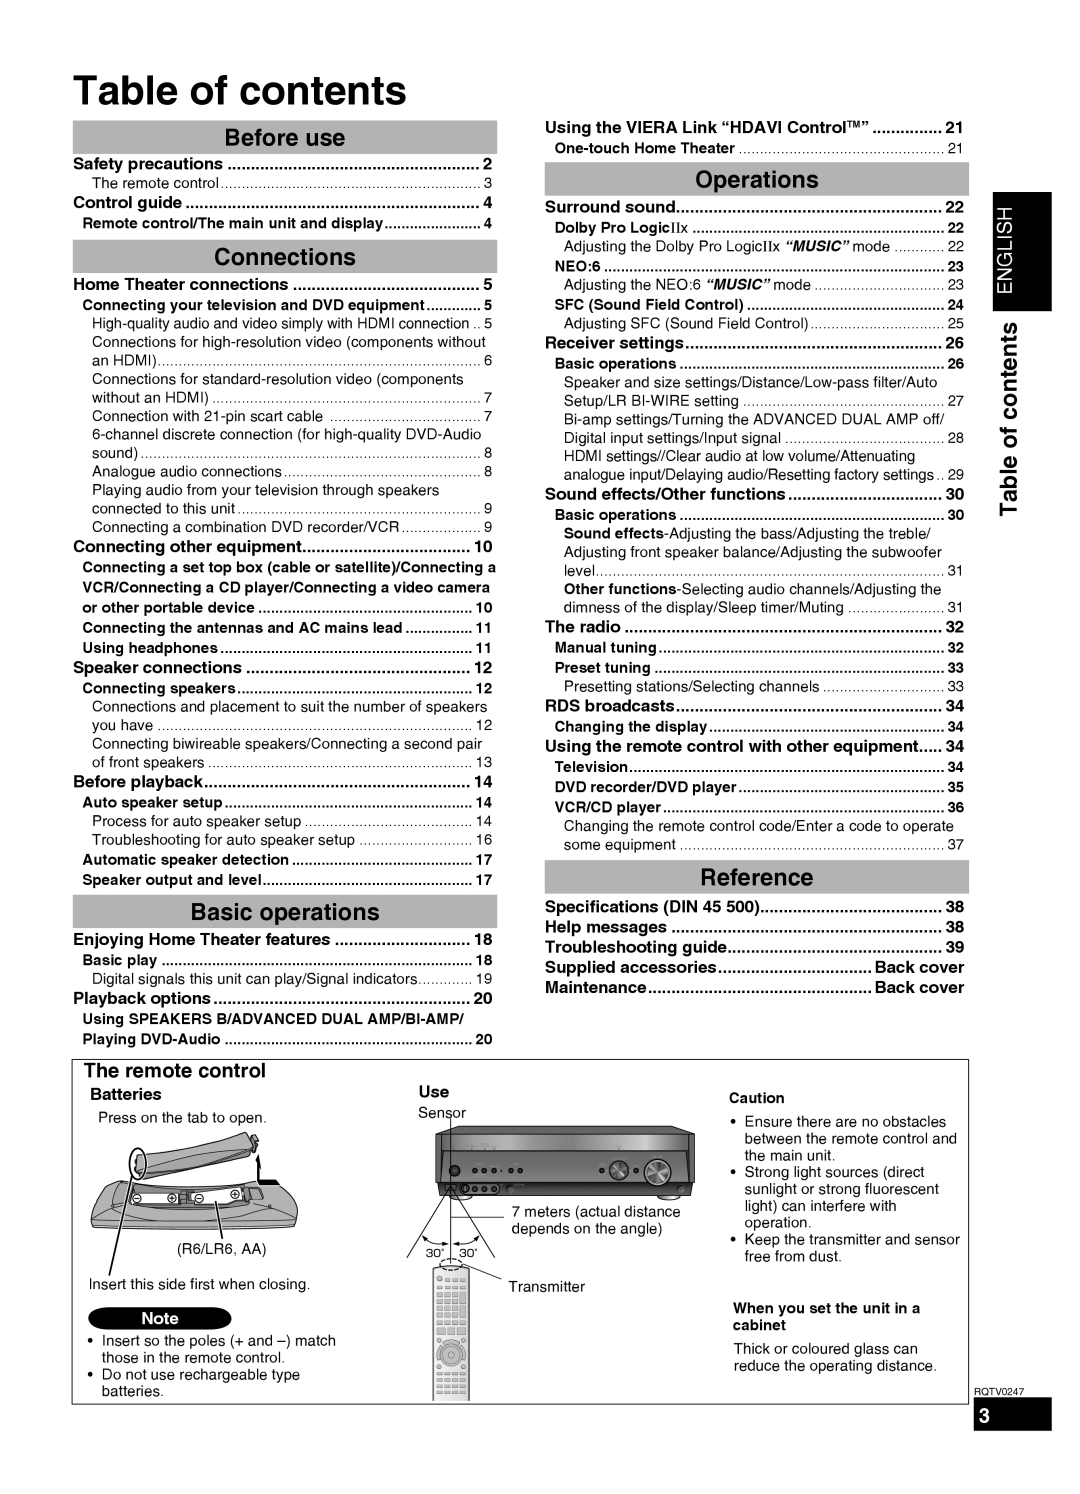 Panasonic SA-XR59 manual Operations, Reference, Table of contents ENGLISH, Before use, Connections, Basic operations 